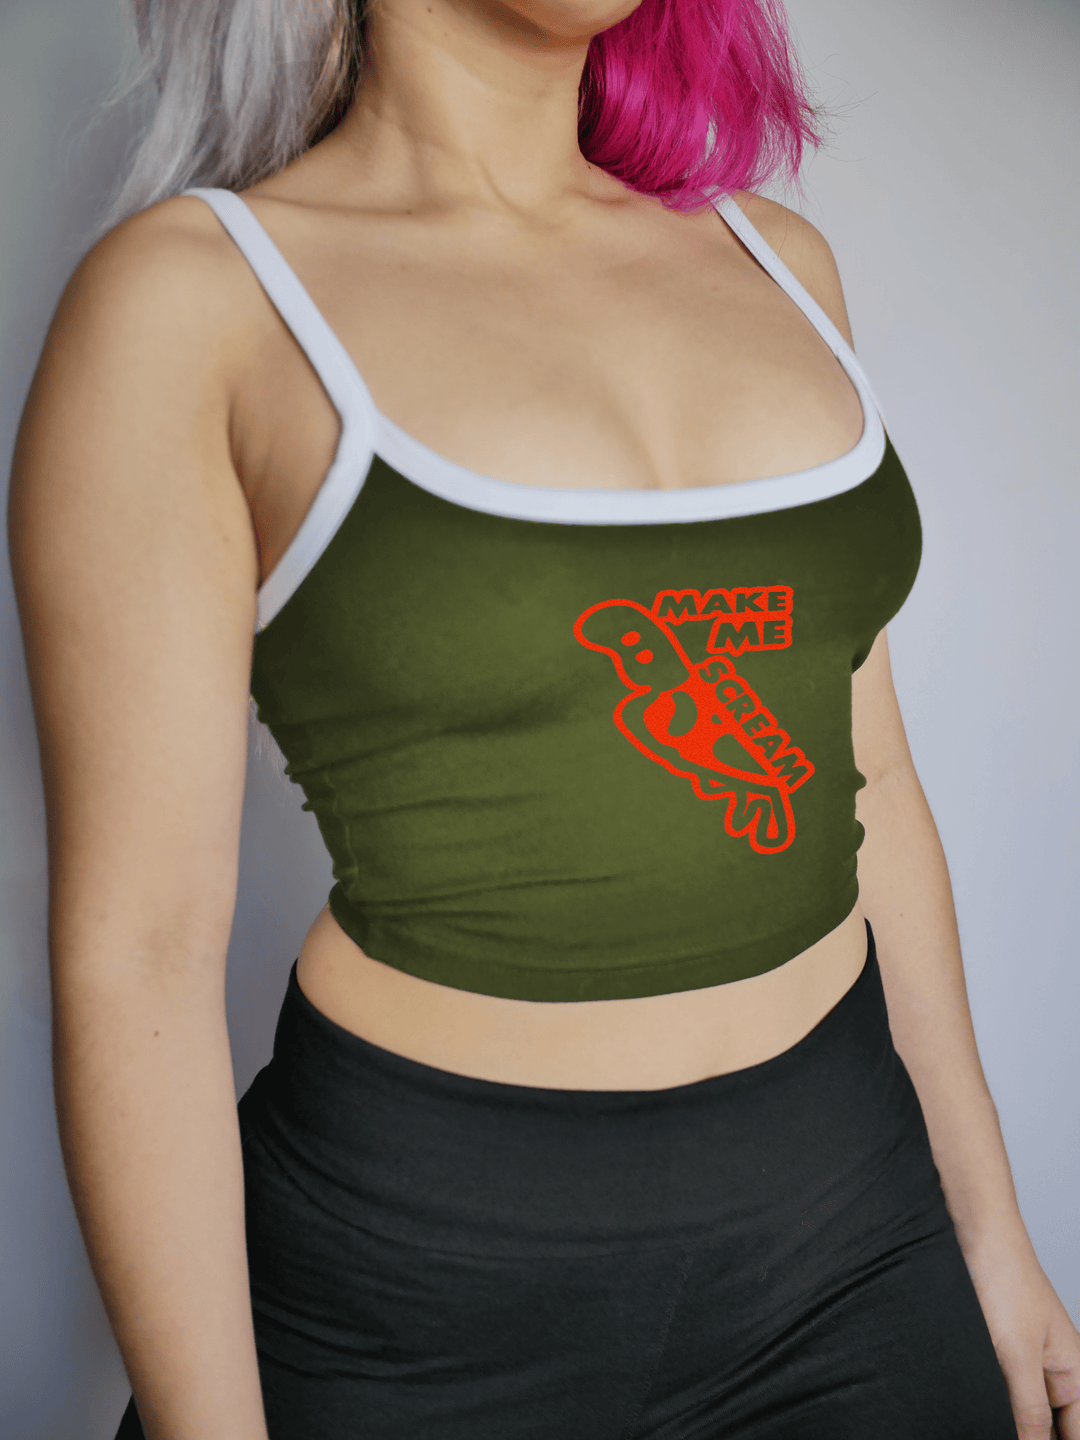 PixelThat Punderwear Tops Olive / Small Make Me Scream Crop Top